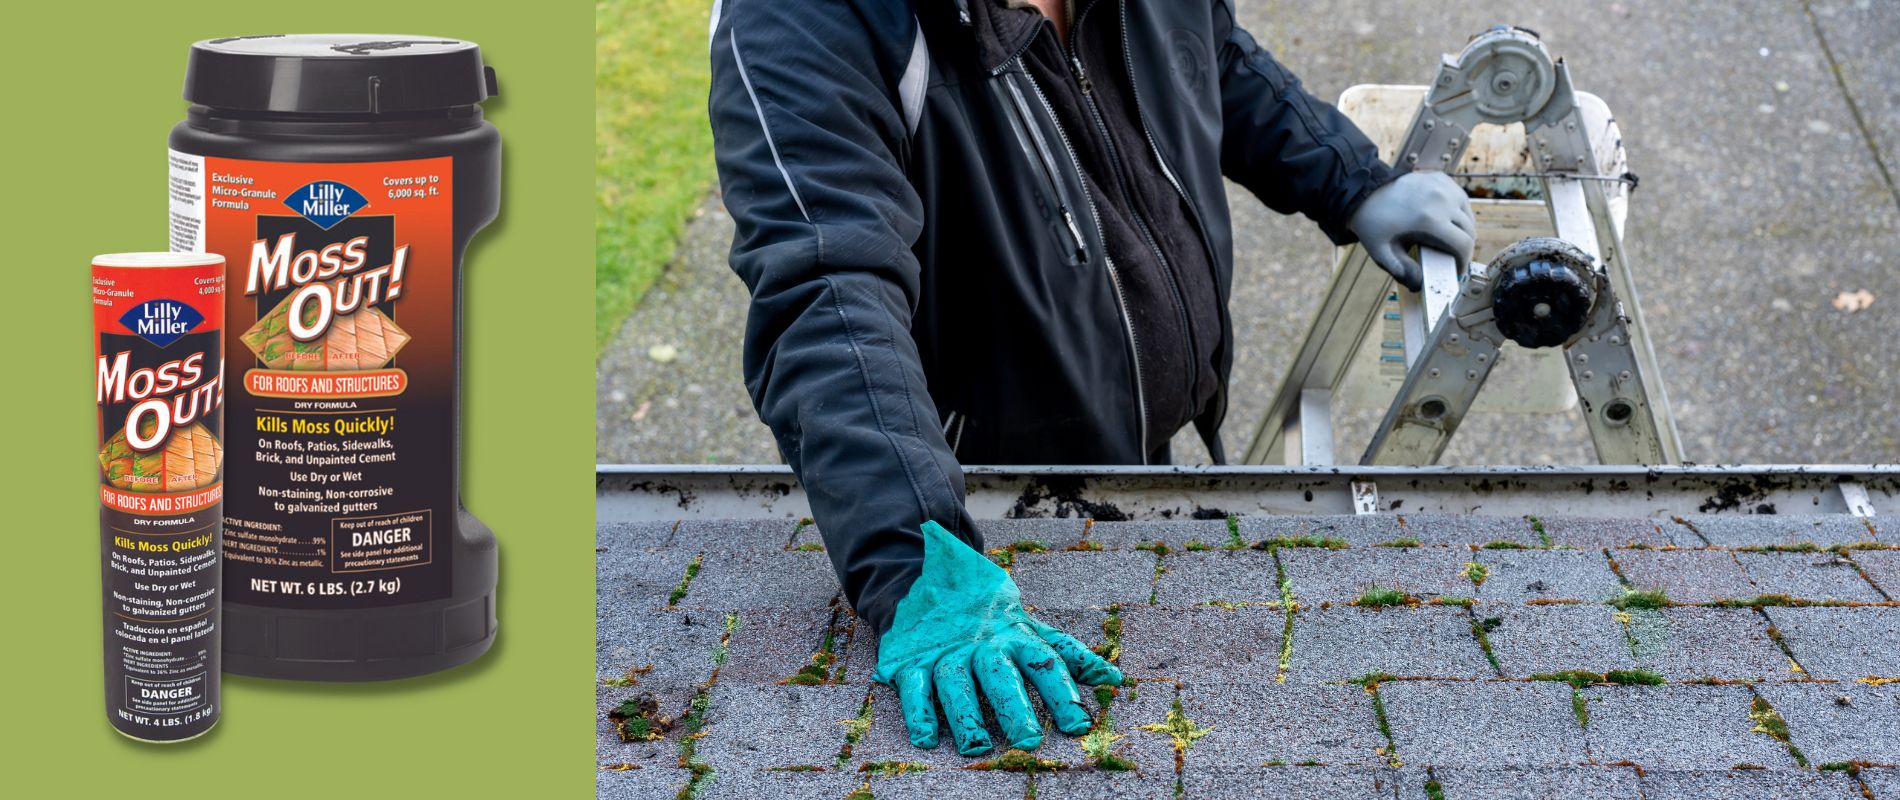 Use Moss-Out for Roofs &#038; Surfaces on roofs, patios, sidewalks, brick, and unpainted cement to kill moss quickly!